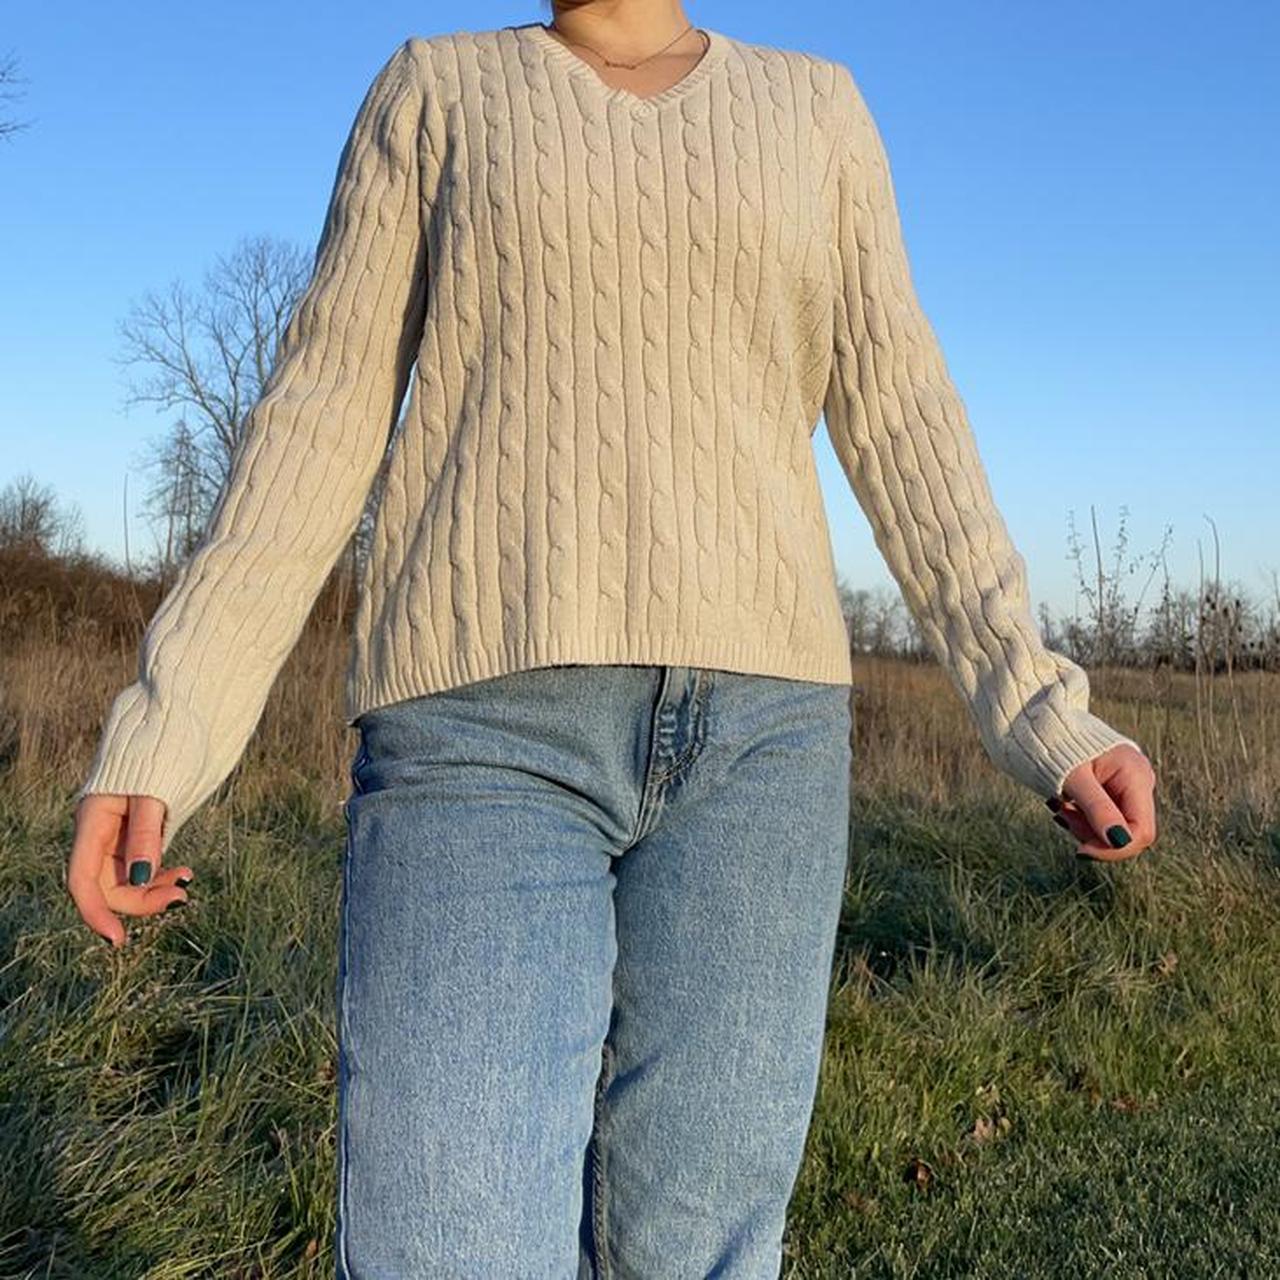 Product Image 1 - cable knit v-neck sweater

tan/beige color
brand: